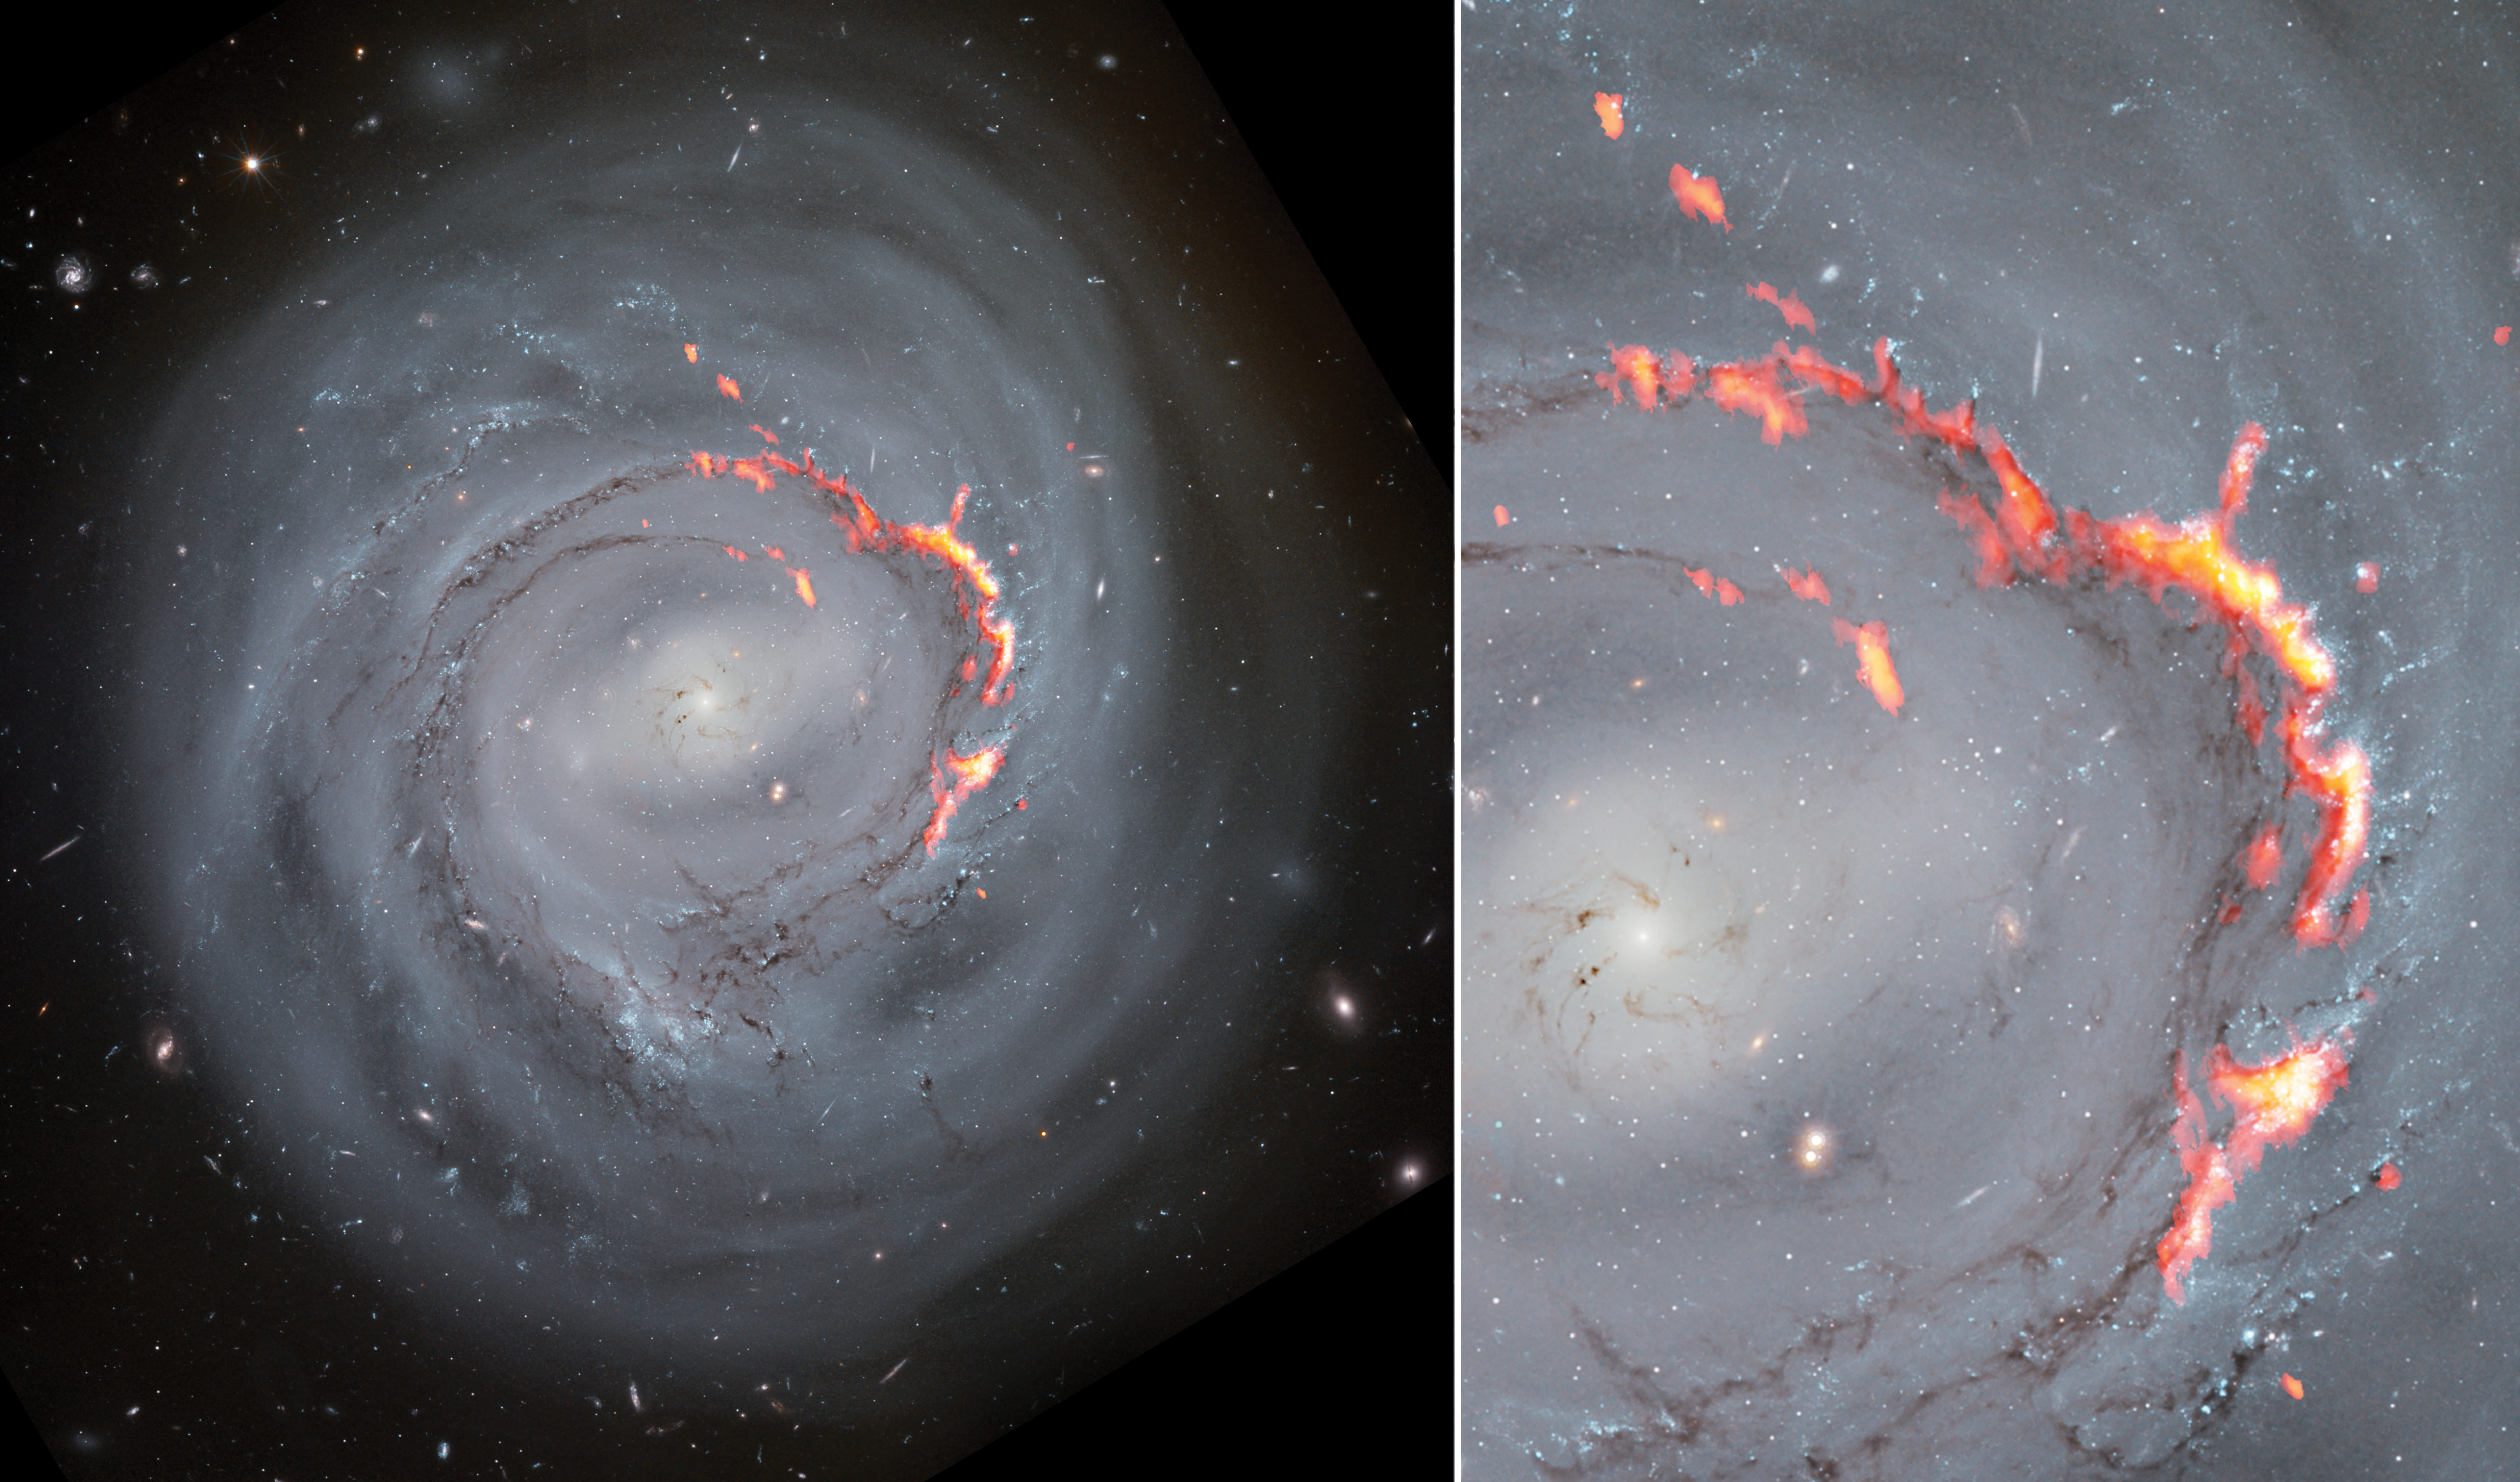 This side-by-side composite shows ALMA (red/orange) data laid over Hubble Space Telescope (optical) images of NGC4921. A new study of the spiral bar galaxy revealed filament structures similar to the Pillars of Creation but significantly larger. These structures are caused by a process known as ram pressure stripping, which pushes gas out of galaxies, leaving them without the material needed to form new stars. Credit: ALMA (ESO/NAOJ/NRAO)/S. Dagnello (NRAO), NASA/ESA/Hubble/K. Cook (LLNL), L. Shatz